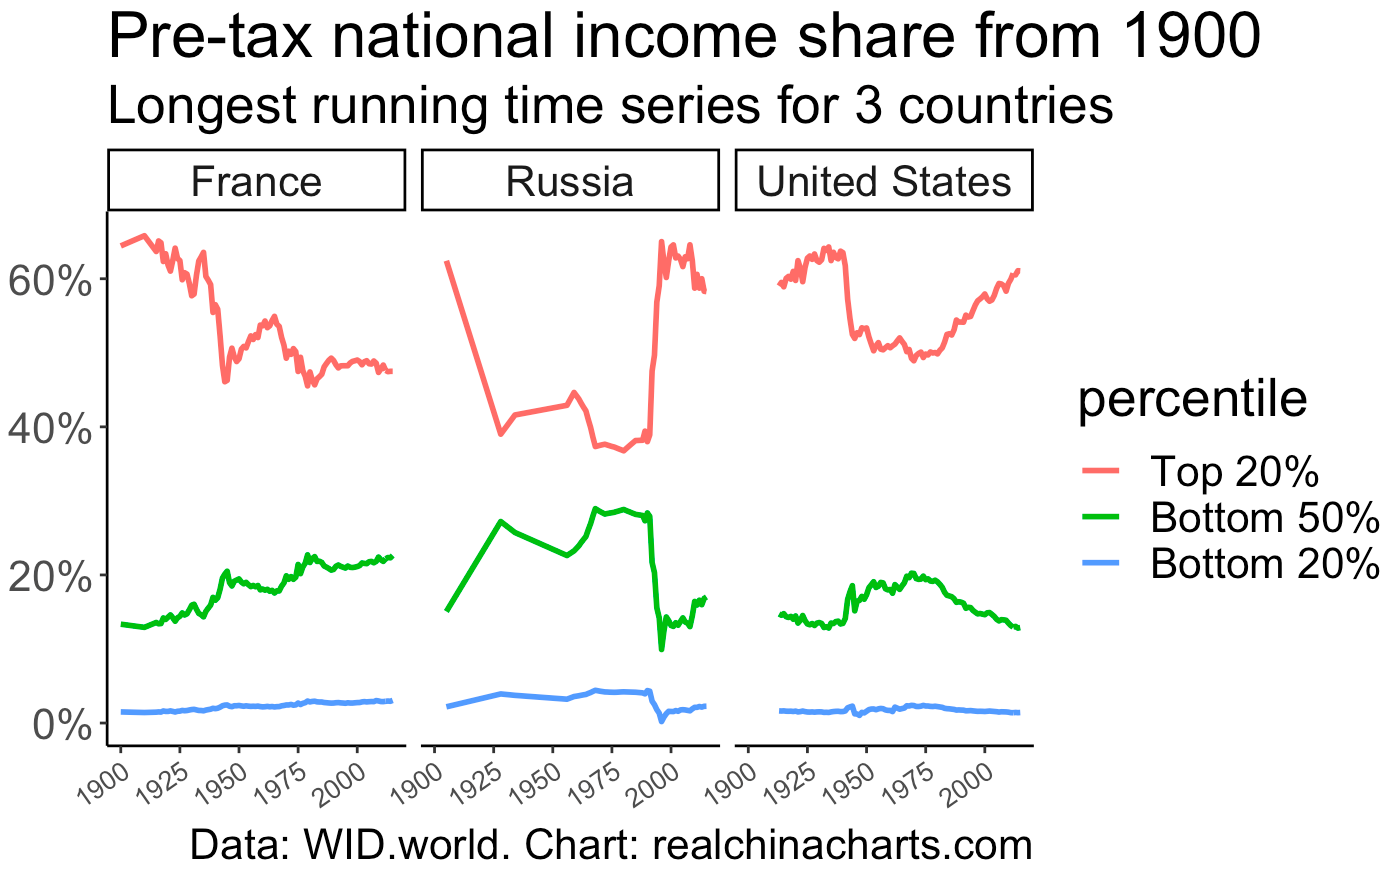 National income share for France, Russia, United States from 1900